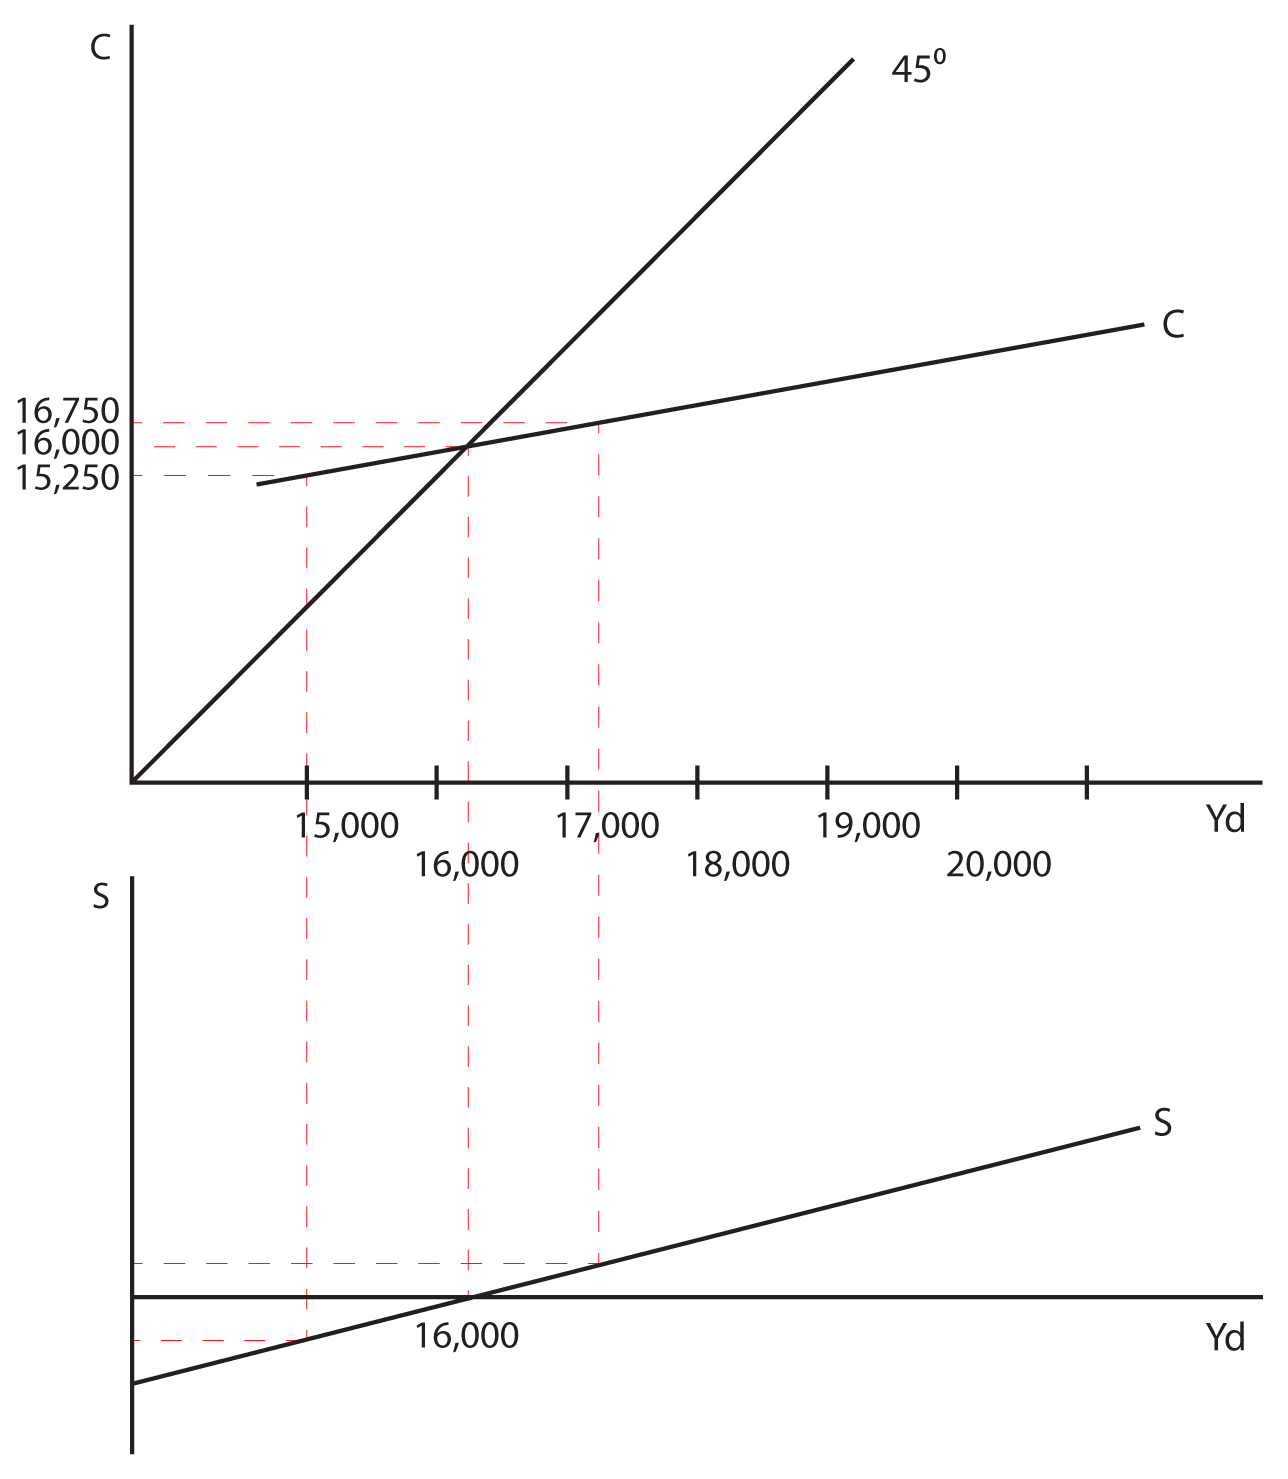 Image 6.03. This image includes two graphs. The first graph depicts Yd on the X axis and C on the Y axis. The lowest value on the X axis (which is closest to the origin) is labeled 15,000. The following values increase by 1,000 as they move up the X axis. The six labeled values are 15,000; 16,000; 17,000; 18,000; 19,000; and 20,000. The values on the Y axis are labeled almost midway up the axis. The lowest value (which is closest to the origin) is labeled 15,250. The second labeled value is just above the first and is labeled 16,000. The third labeled value is just above the second and is labeled 16,750. A dotted red line extends horizontally from each of the three values on the Y axis. The dotted red line that extends from the 15, 250 value on the Y axis moves in a horizontal direction until it turns downward 90 degrees, which forms a right angle, and extends downward and passes through the 15,000 value on the X axis. The dotted red line that extends from the 16,000 value on the Y axis moves in a horizontal direction until it turns downward 90 degrees, which forms a right angle. The line extends downward and passes through the X axis to the right of the 16,000 value on the X axis. The dotted red line that extends from the 16,750 value on the Y axis moves in a horizontal direction until it turns downward 90 degrees, which forms a right angle, and extends downward and passes through the X axis to the right of the 17,000 value on the X-axis. A solid black line extends from the origin in an increasing slope at a 45 degree angle. The line is labeled 45 degrees. A second solid black line starts just before the right angle formed by the dotted red line that extends from value 15,250 on the Y axis. The solid black line passes through three right angles formed by the red dotted lines extending from values 15,250, 16,000, and 16,750 on the Y axis. The solid black line follows an increasing slope as it passes through these right angles, and the line is labeled C. The line labeled C and the line labeled 45 degrees intersect at the dotted red line's right angle that extends from the 16,000 value on the Y axis. This ends the description of the image's first graph. The image's second graph is located below the first. The second graph depicts S on the Y axis. A horizontal line extends from the lower half of the Y axis and is labeled Yd. The three dotted red lines from the first graph above extend down to this second graph. The dotted red line that extended from the 15,250 value on the first graph's Y axis extends down vertically past the second graph's horizontal Yd line. Then, it turns left 90 degrees, which is a right angle, and extends to the Y axis. The dotted red line that extended from the 16,000 value on the first graph's Y axis extends down vertically until it touches the second graph's Yd line. Then, the dotted red line turns left 90 degrees, which is a right angle, and extends to the second graph's Y axis. The dotted red line that extended from the 16,750 value on the first graph's Y axis extends down vertically and stops before touching the second graph's horizontal Yd line. Then, the dotted red line turns left 90 degrees, which is a right angle, and extends to the second graph's Y axis. The second graph also contains a solid black line that is labeled S and starts at a point on the Y axis that is below the horizontal Yd line. Line S then extends from the Y axis in an increasing slope that passes through the right angles of each of the three dotted red lines that turned left 90 degrees. The line labeled S and the line labeled 45 degrees intersect at the middle dotted red line's right angle, which is formed at point where it touched the Yd line.